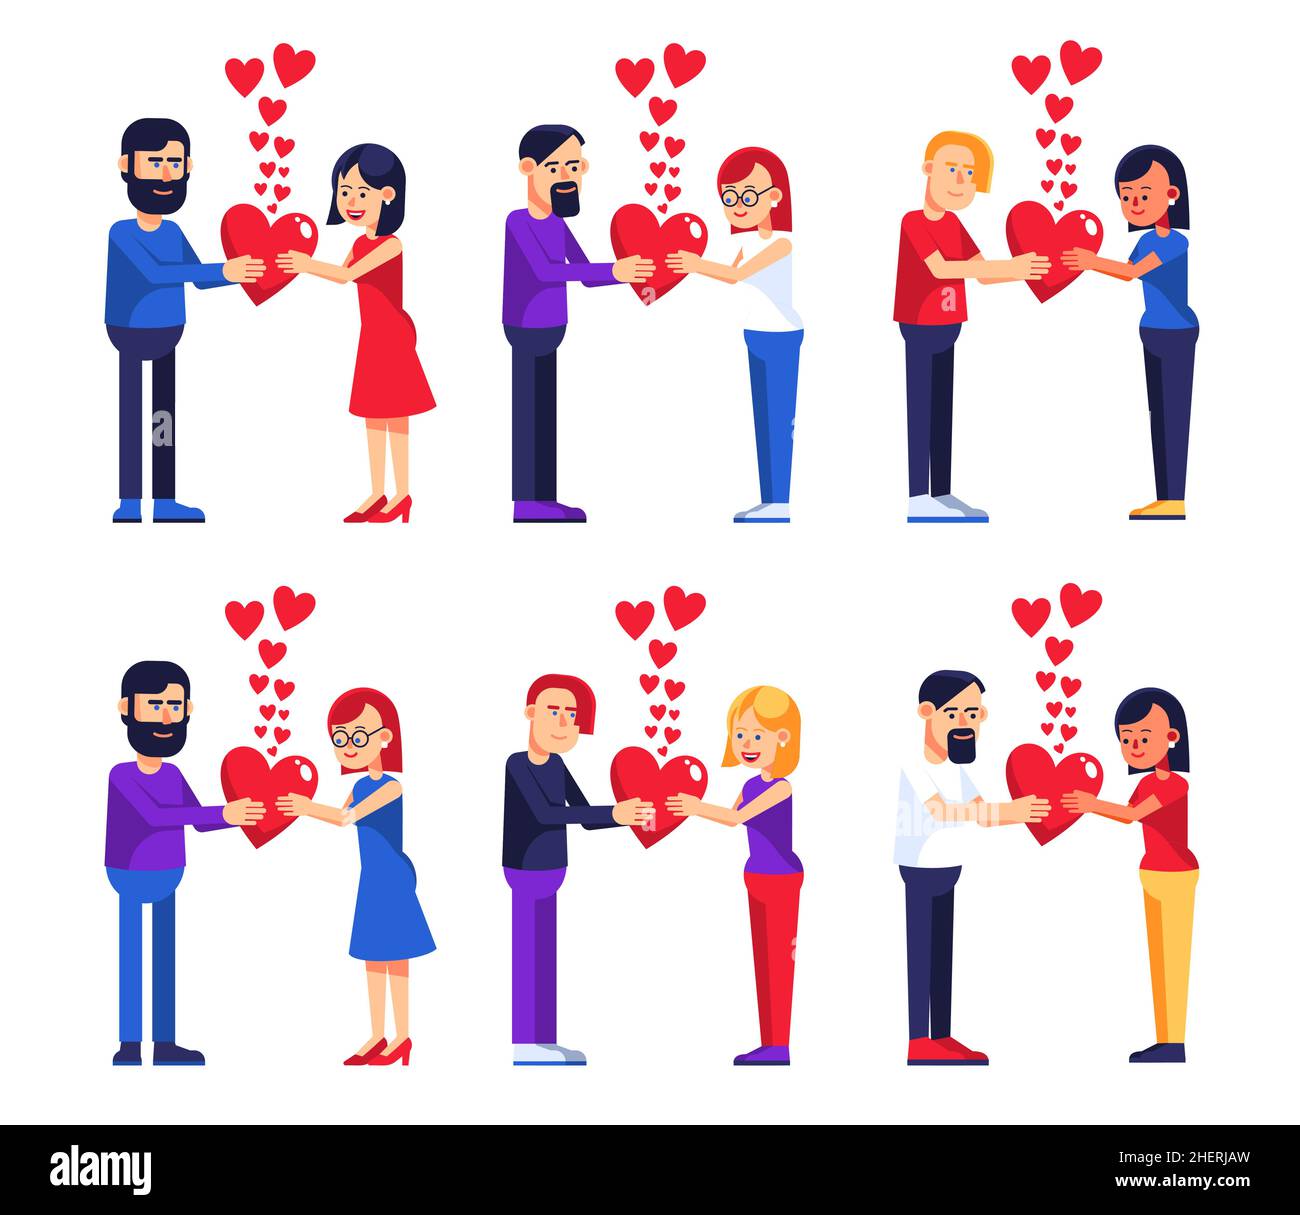 Couples in love give each other hearts Stock Vector